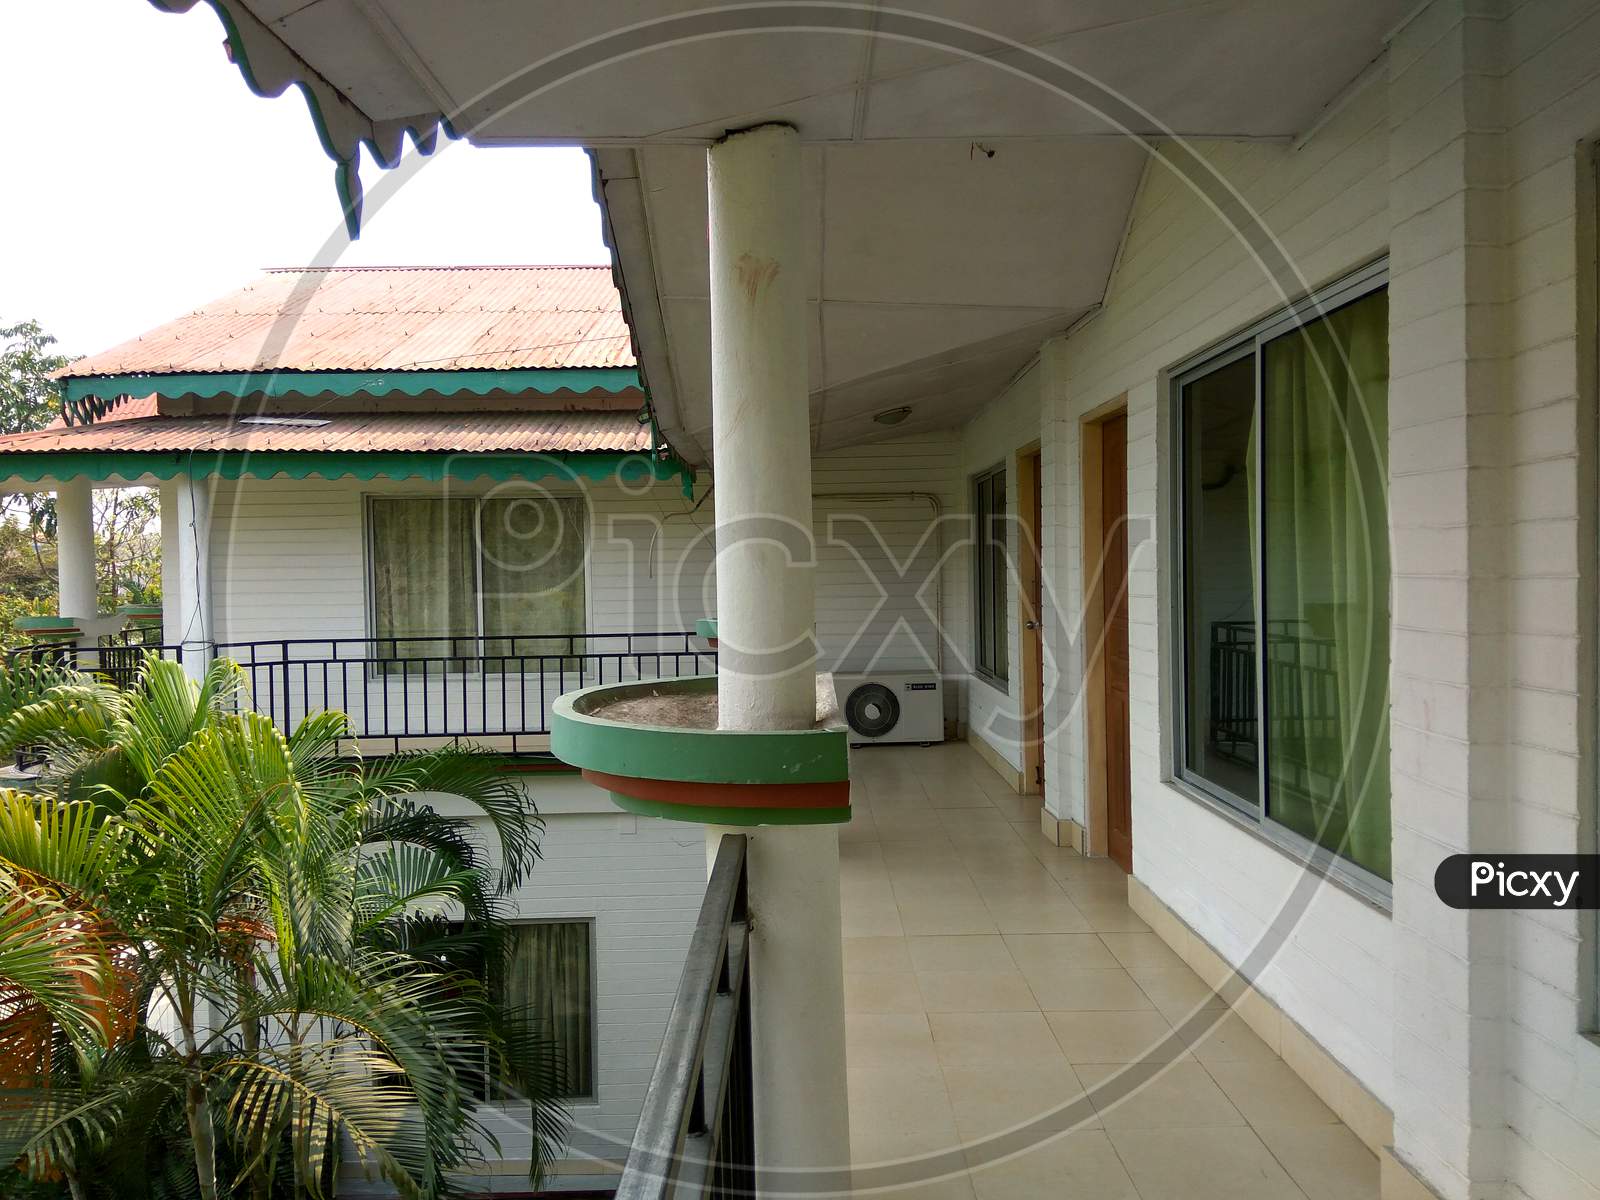 Balcony of a beautiful bungalow and big glass window rooms